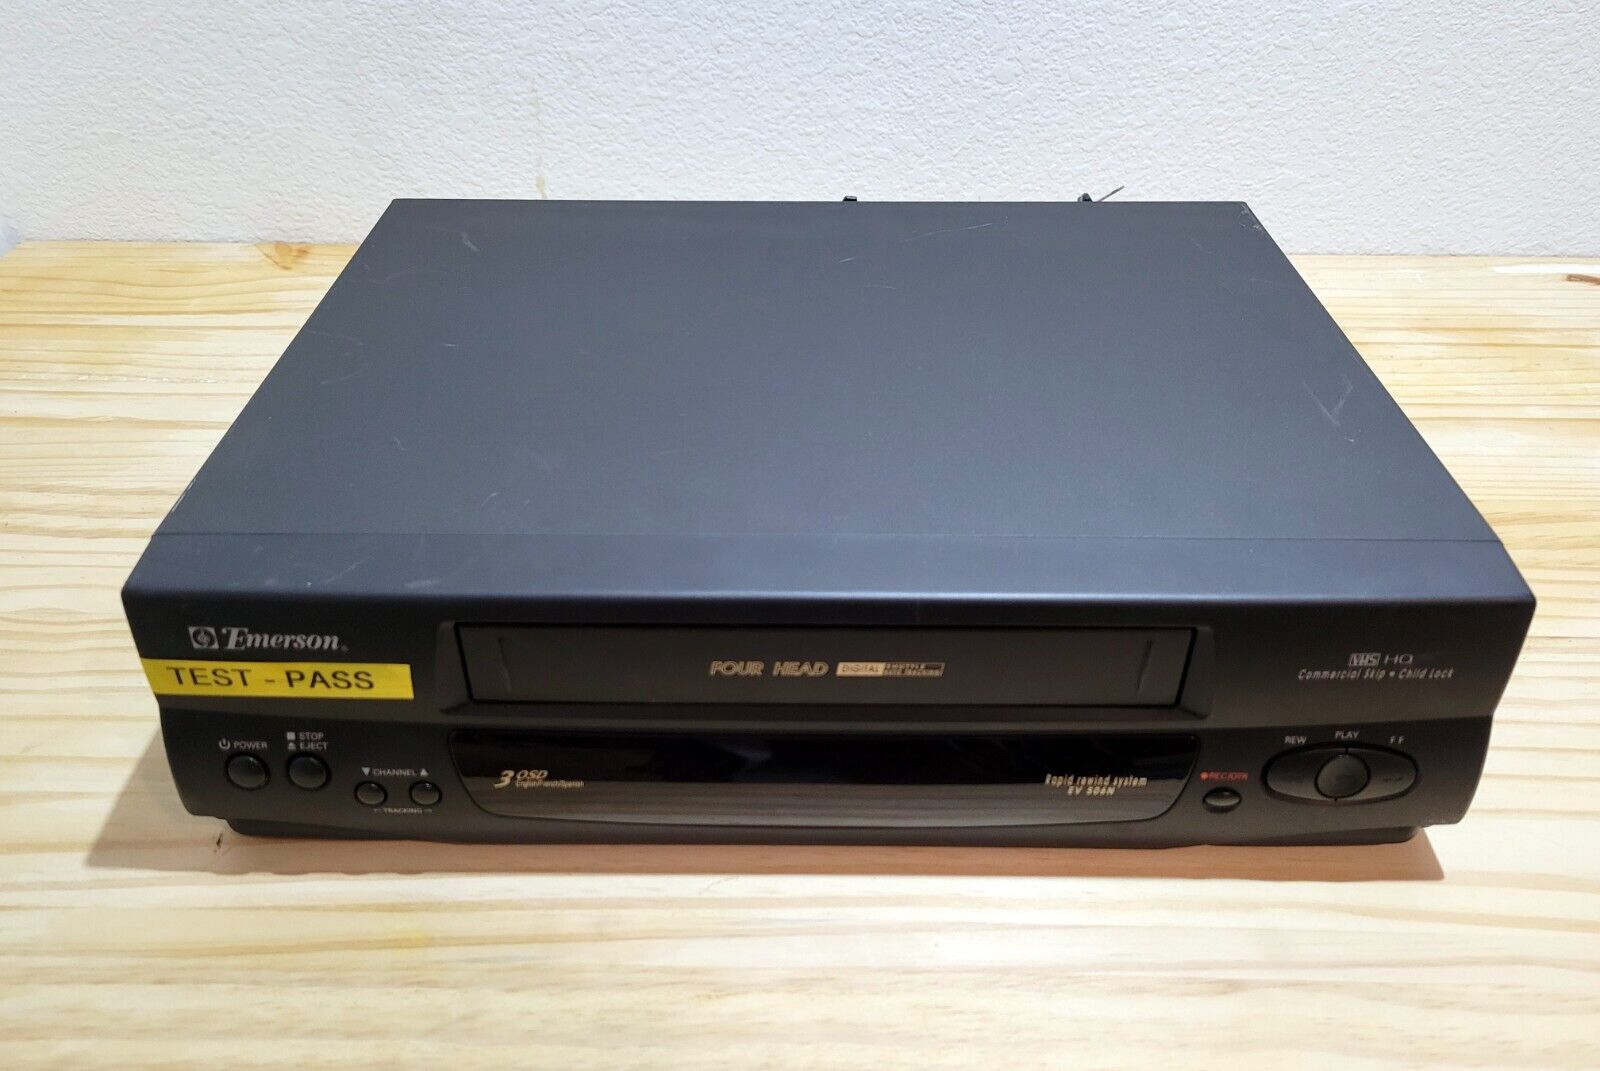 Emerson (EV506N) 4 Head VCR - Used, Tested - No Remote Included